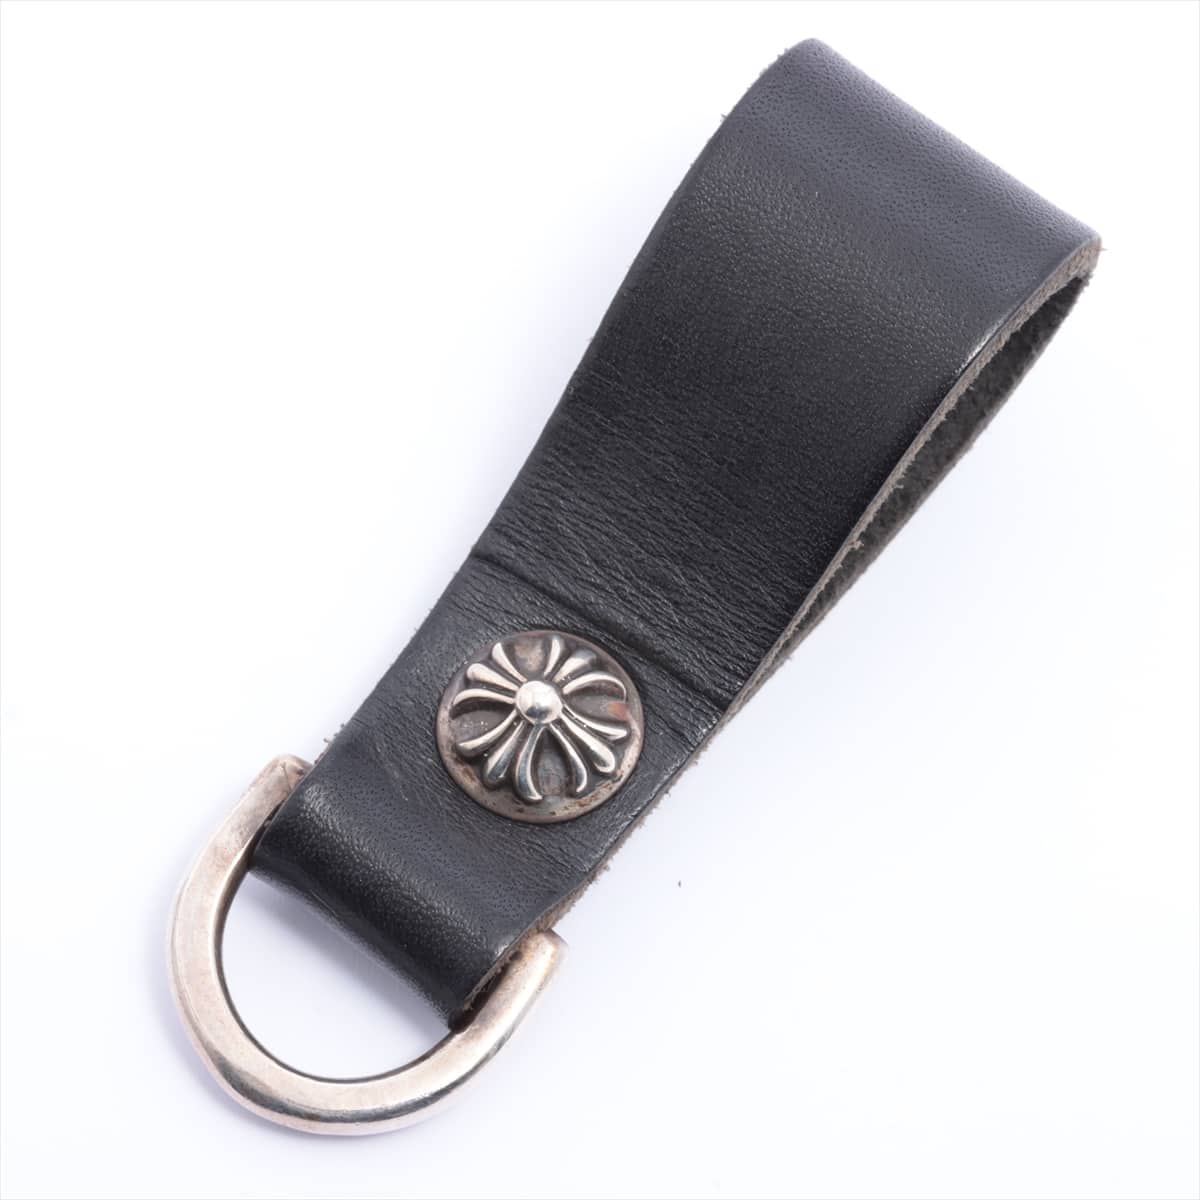 Chrome Hearts Belt Loop D Ring Keyring Leather & 925 With invoice